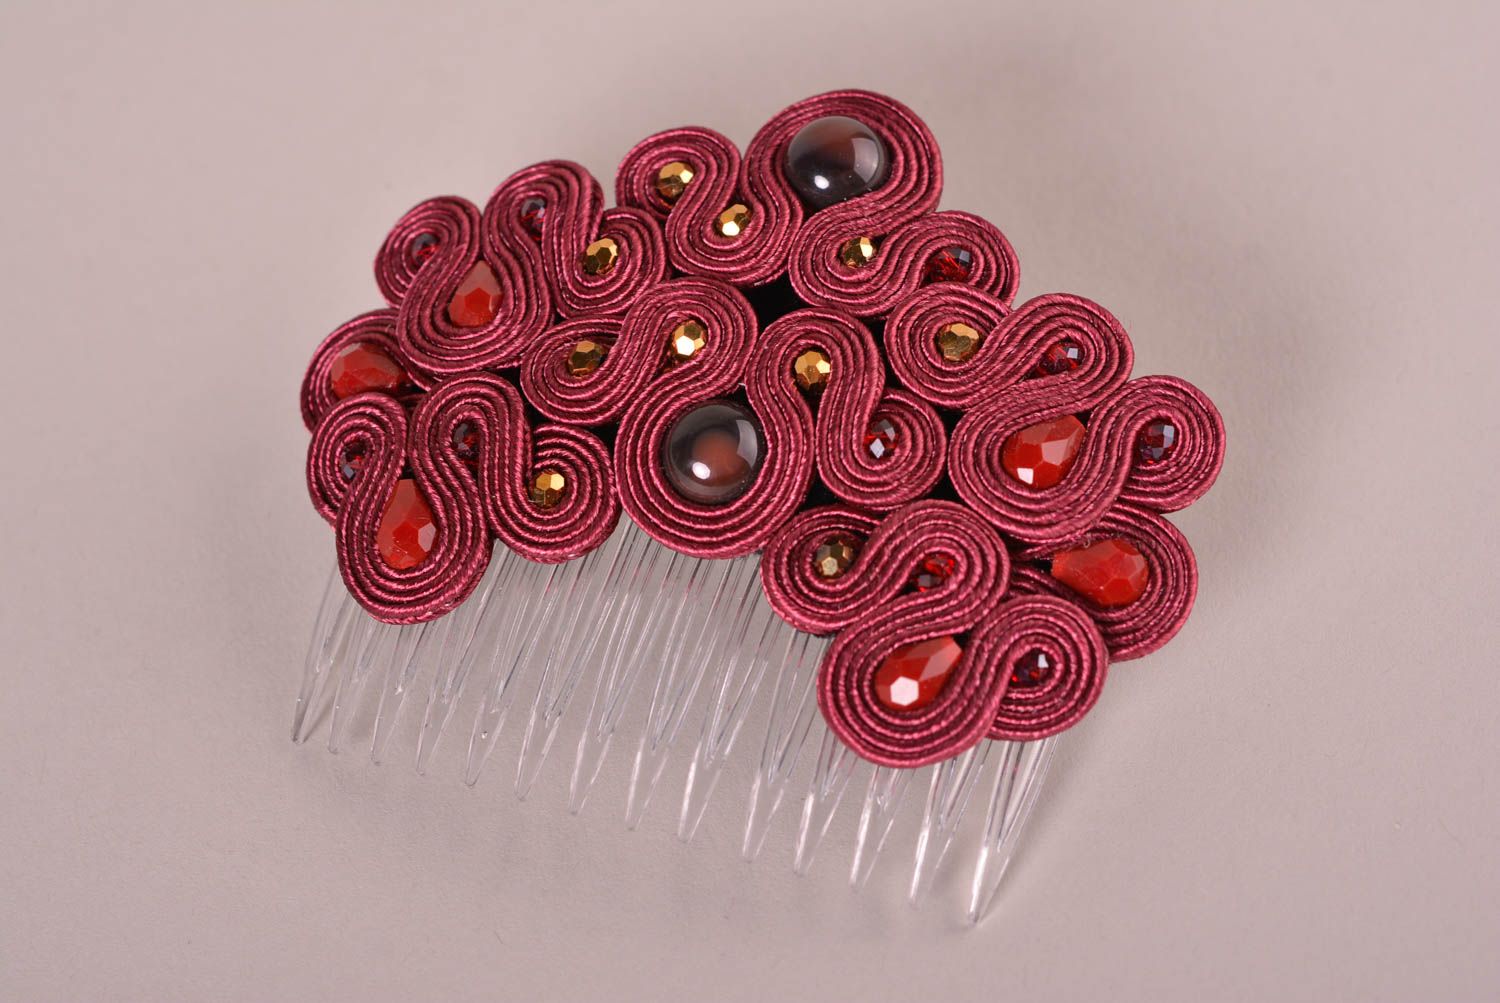 Handmade hair comb designer hair accessories hair jewelry best gifts for girls photo 1